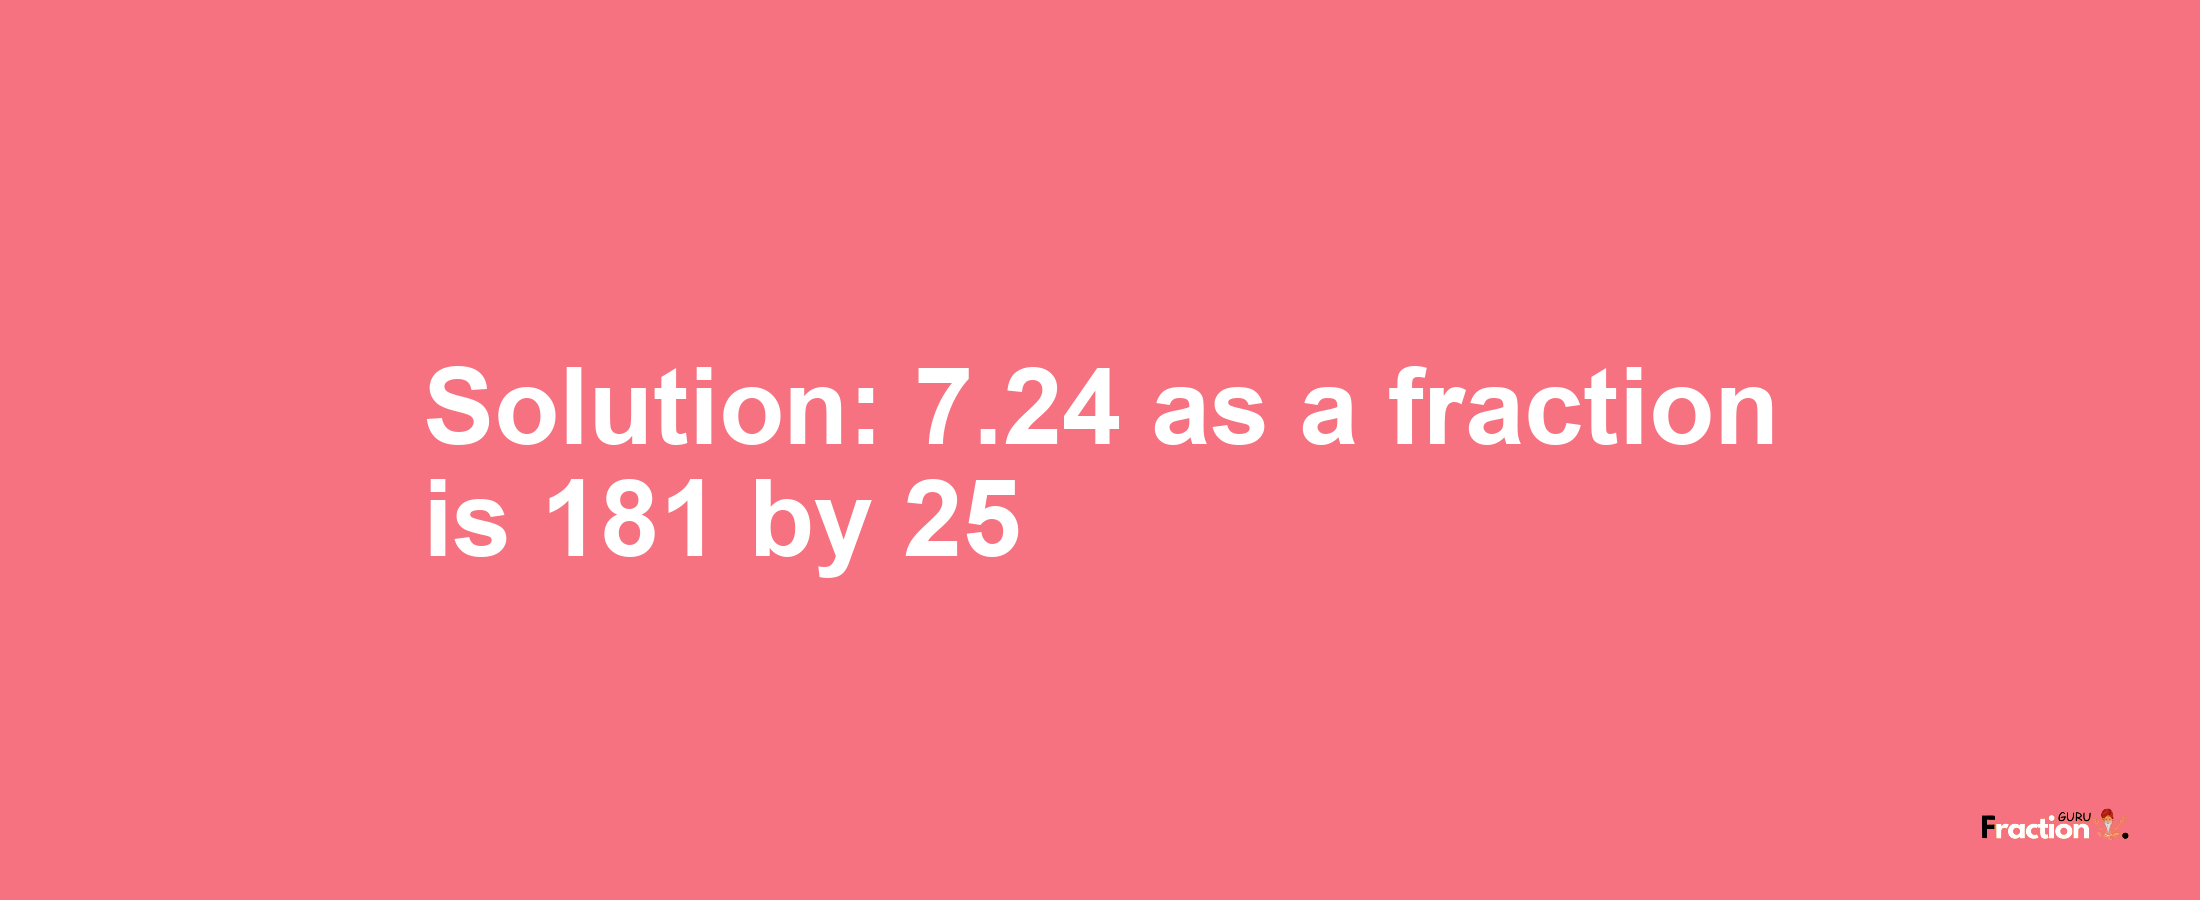 Solution:7.24 as a fraction is 181/25